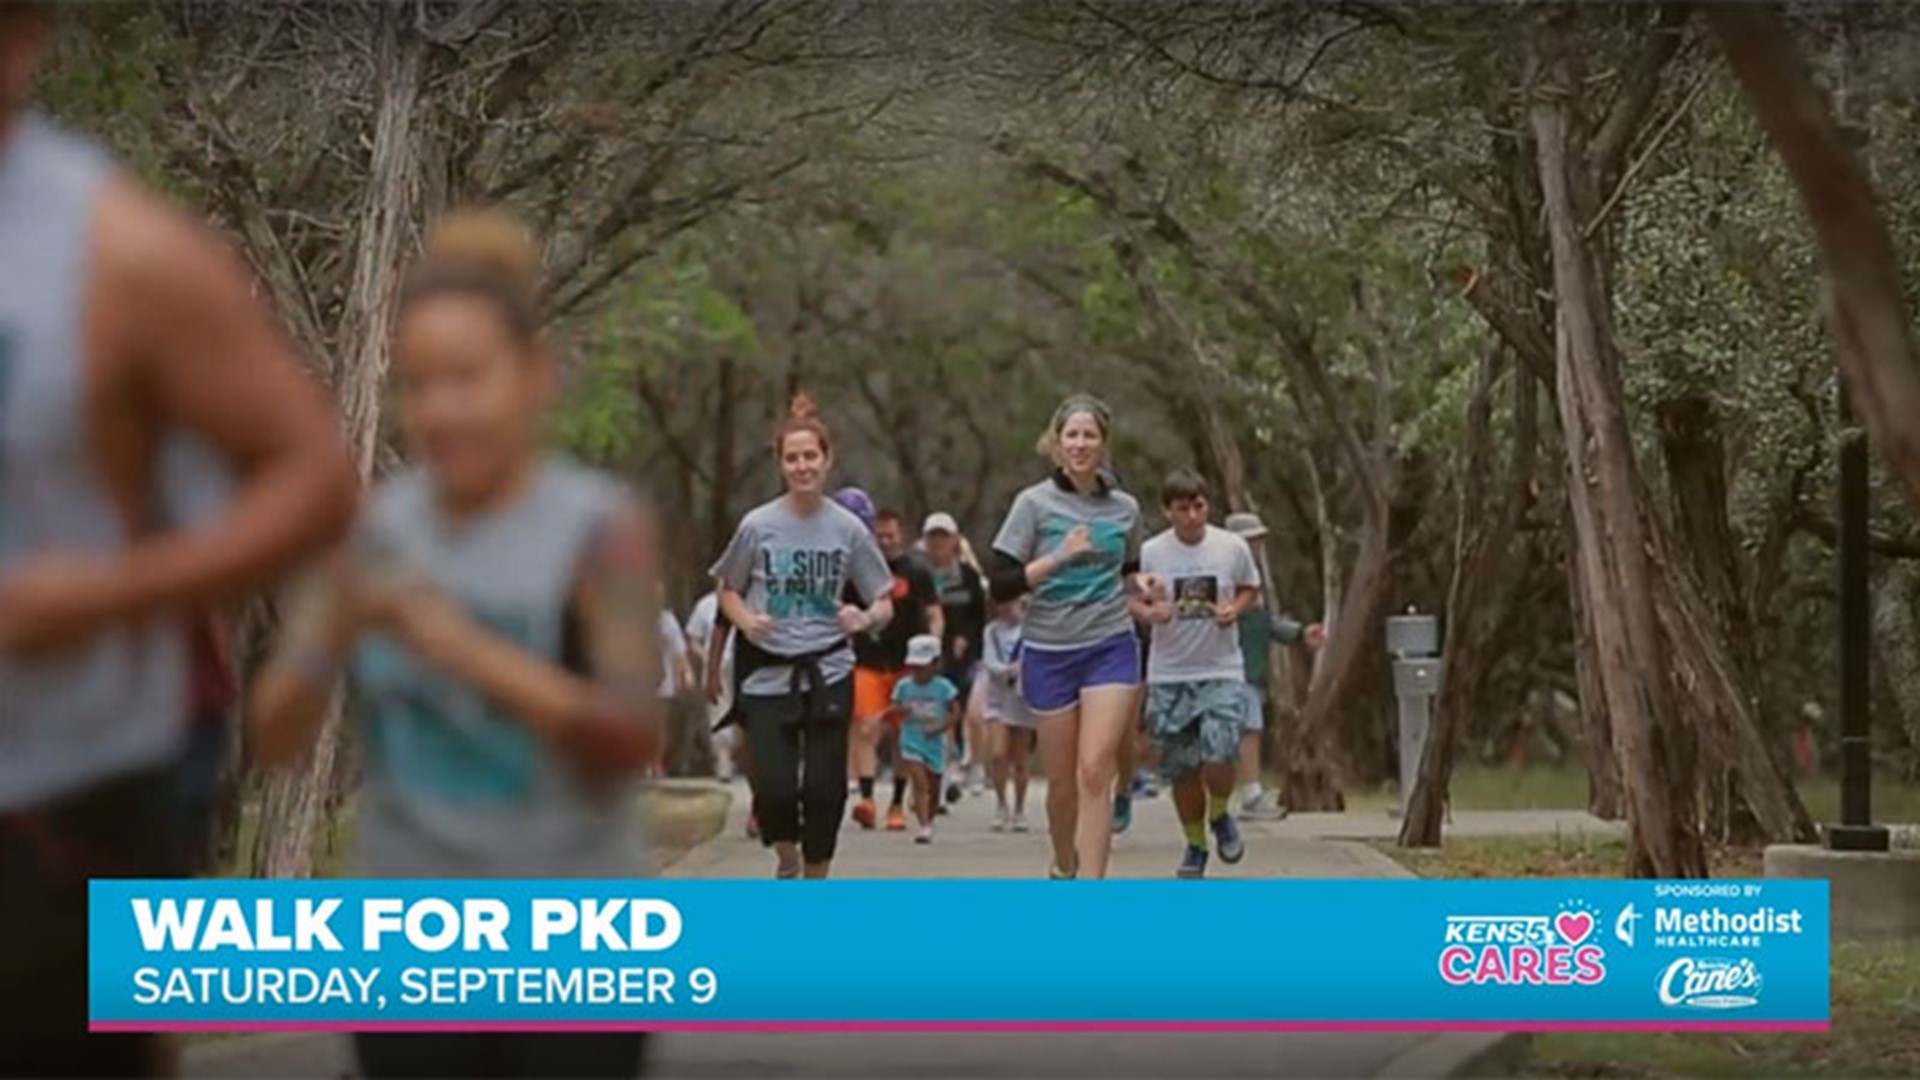 The annual San Antonio Walk for PKD is your chance to take a small step and make a big difference in the lives of people with polycystic kidney disease.